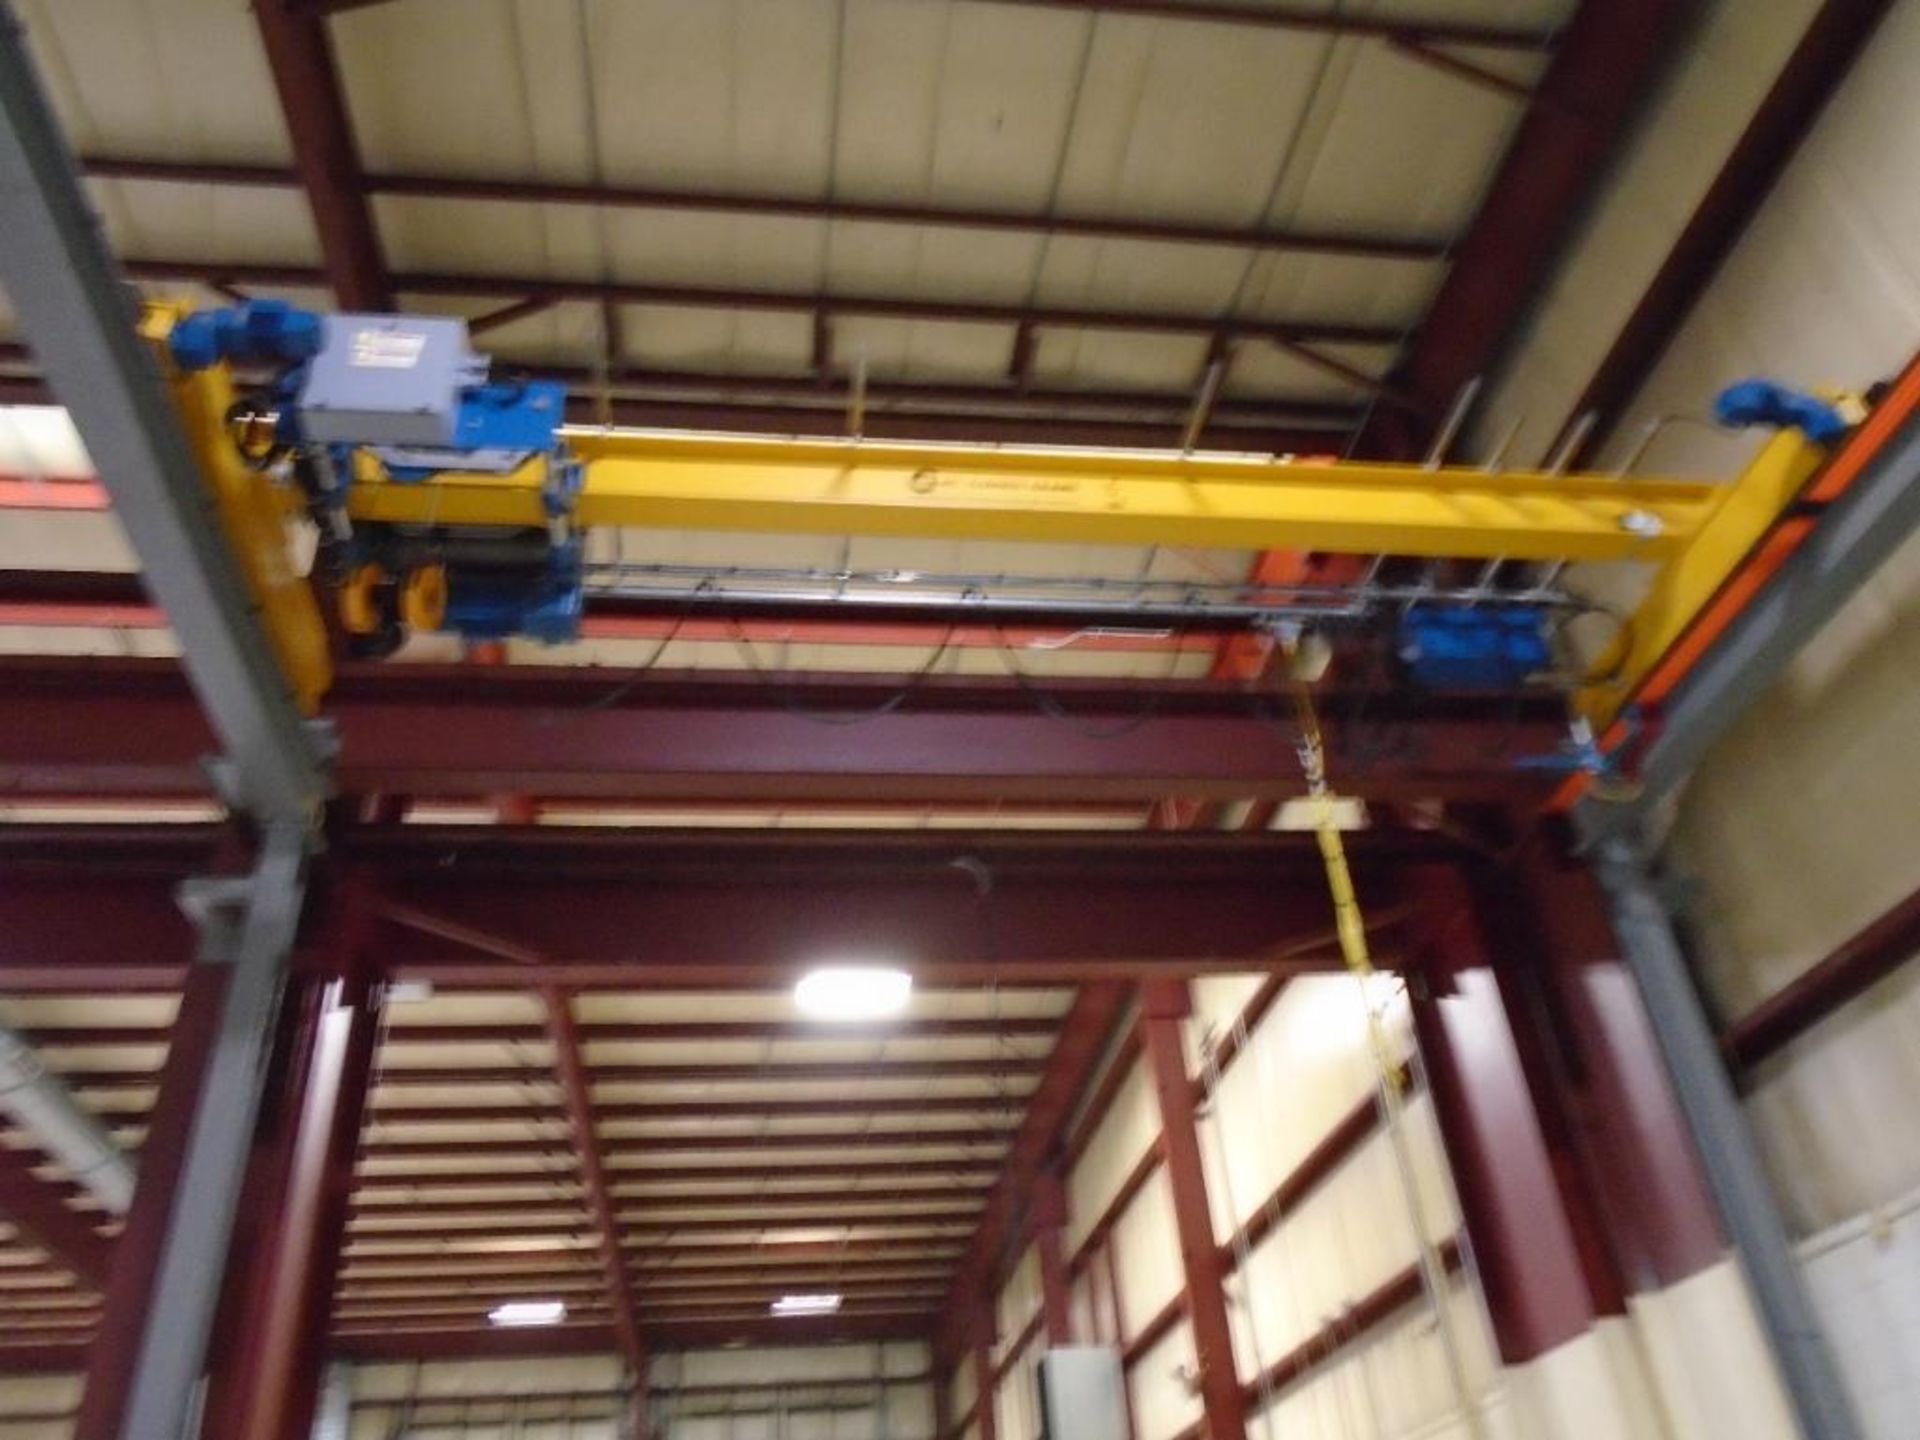 5 Ton Bridge Crane with Rail Supports - Delayed Removal